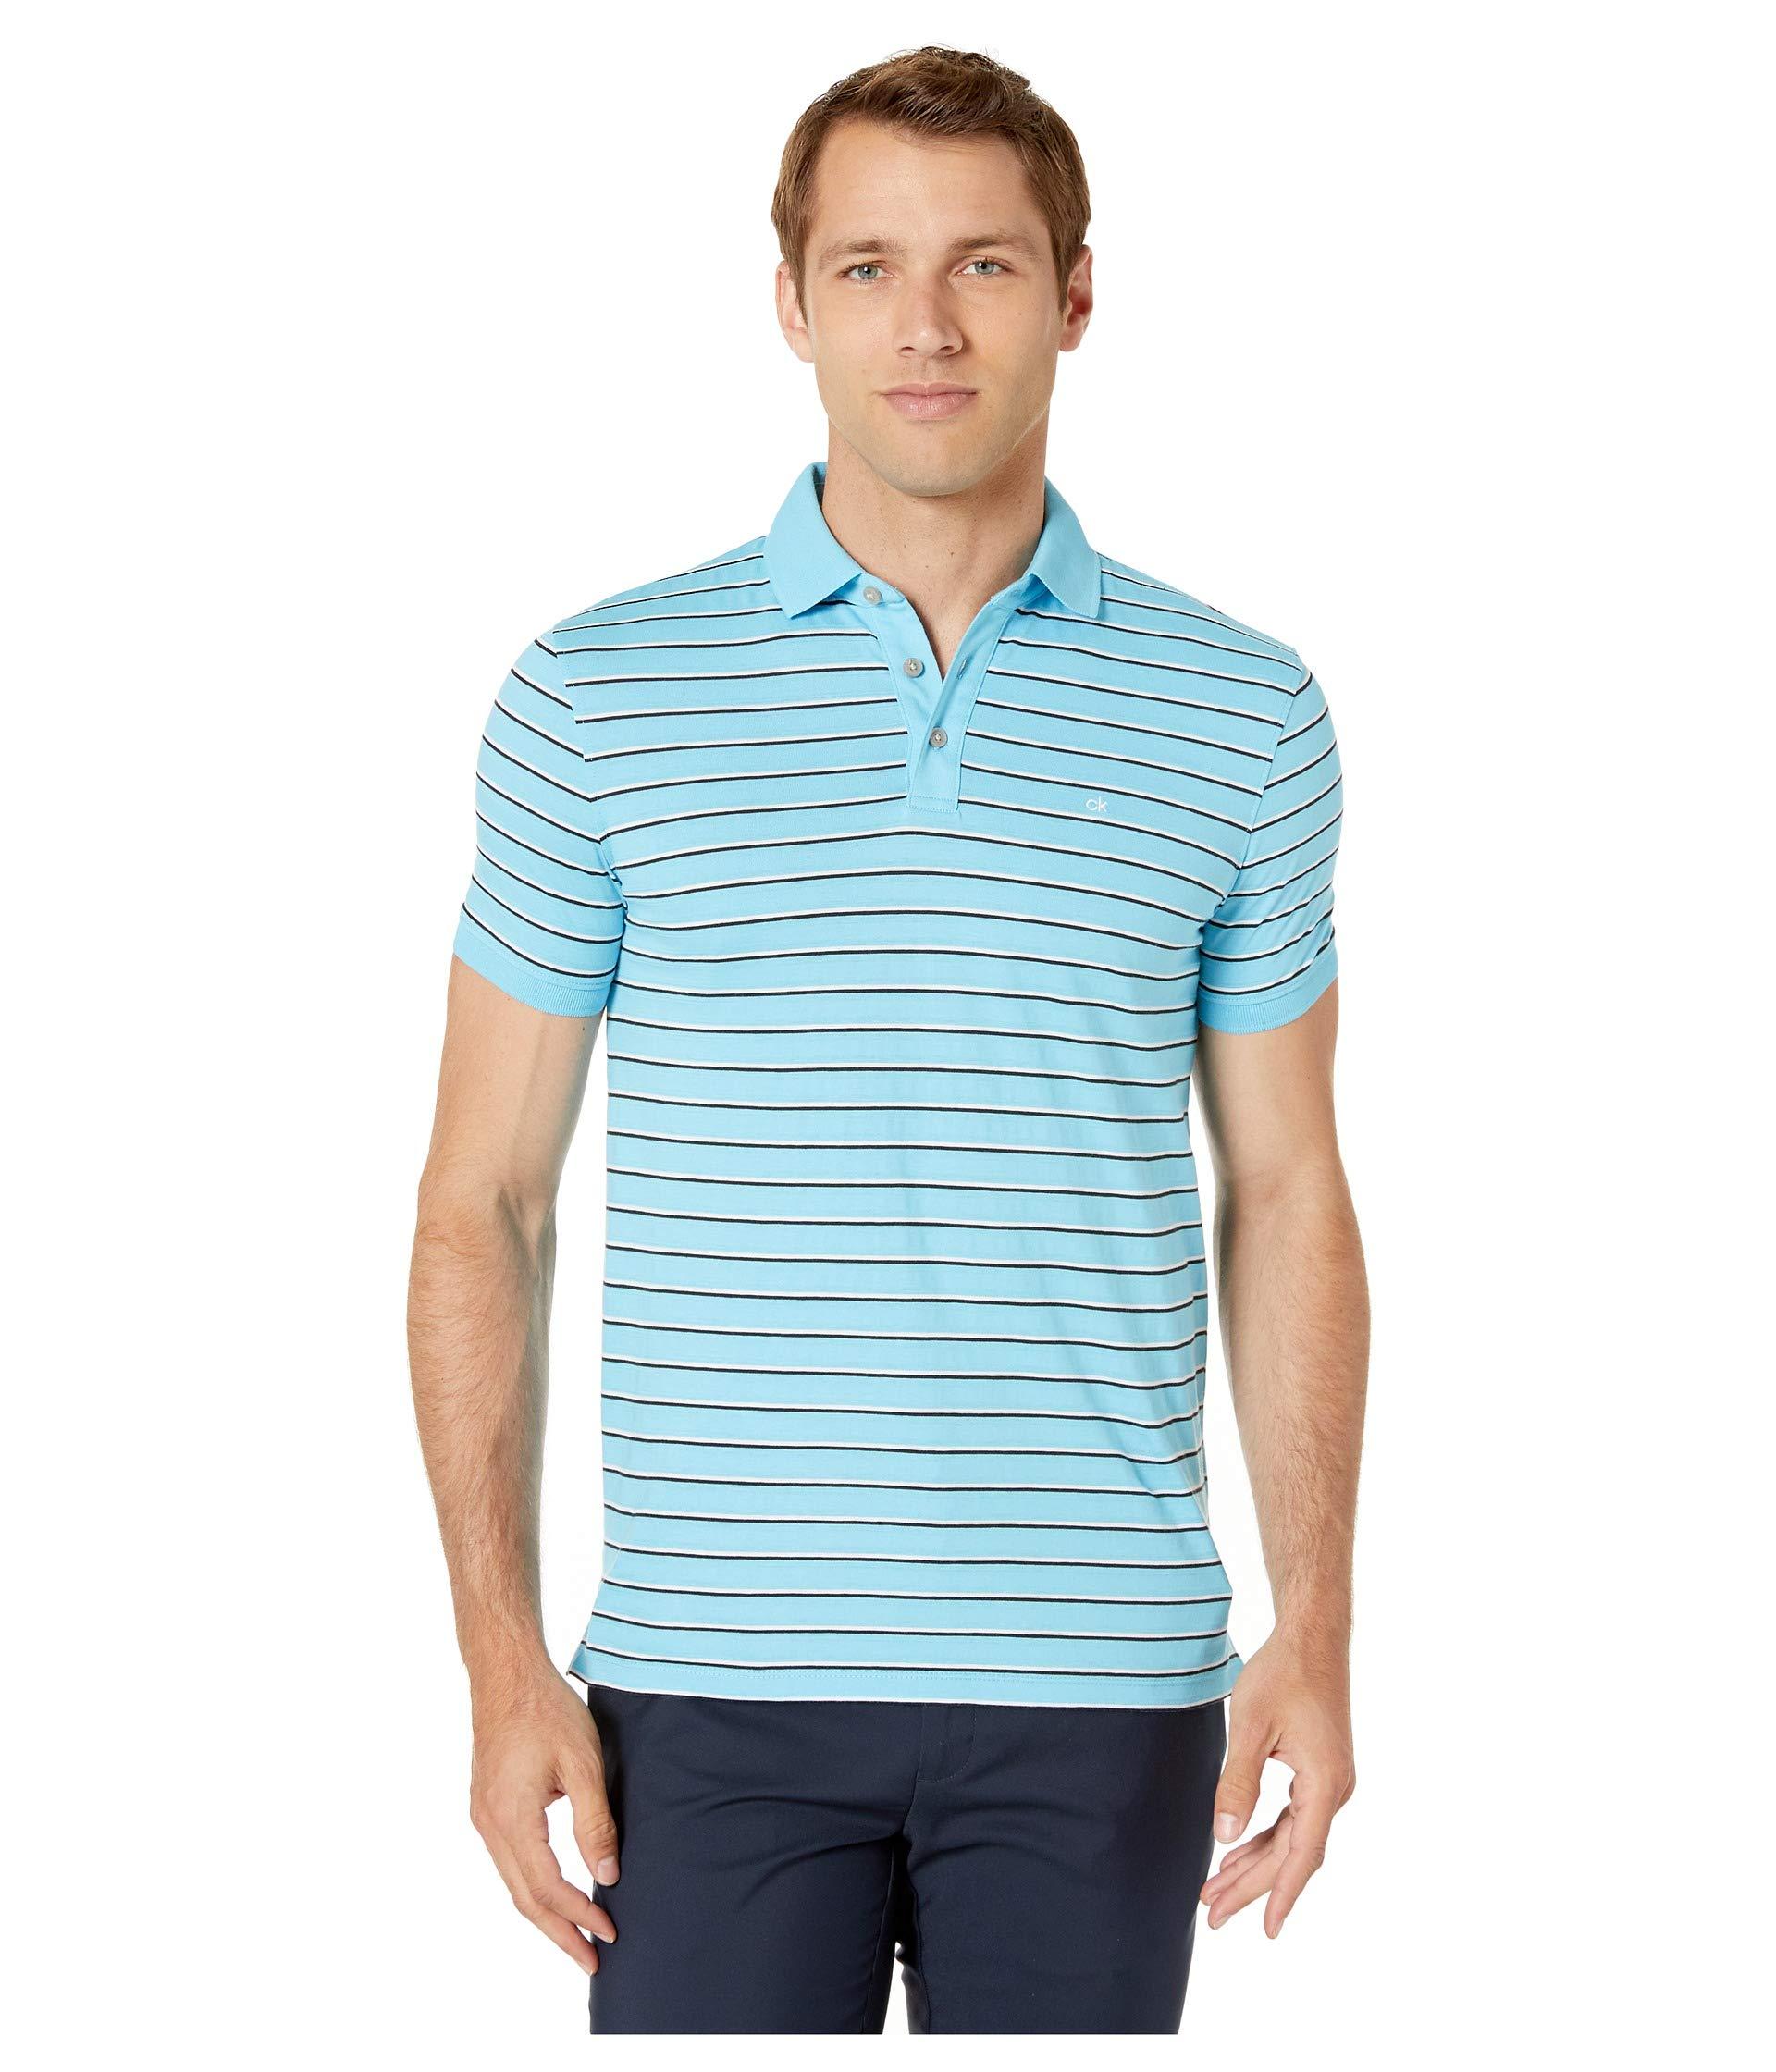 Calvin Klein Cotton The Liquid Touch Polo in Gray for Men - Lyst